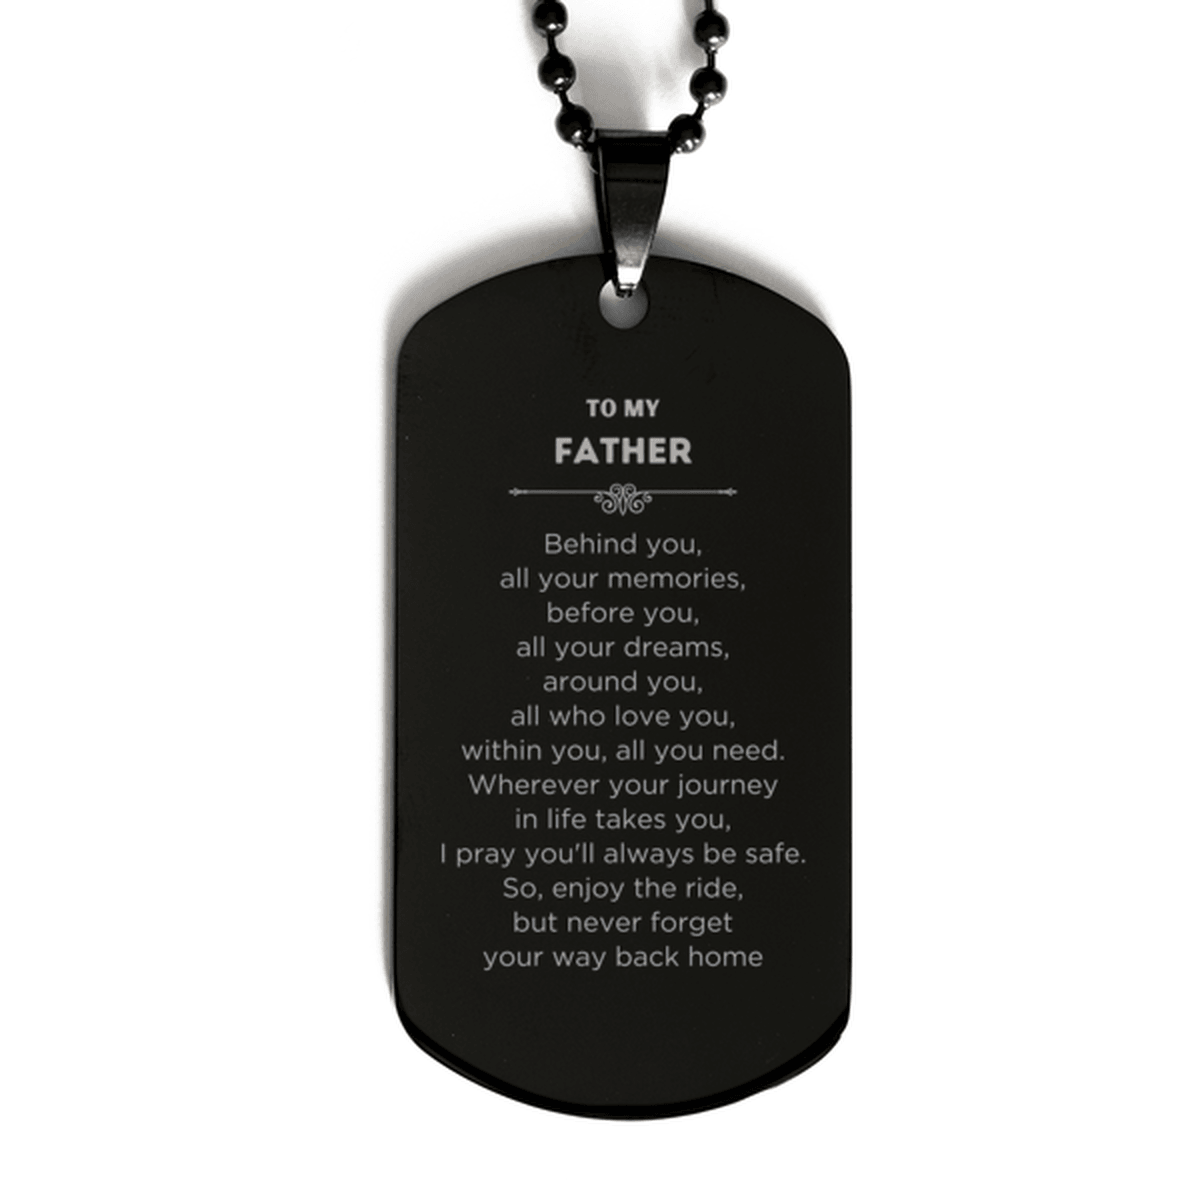 To My Father Gifts, Inspirational Father Black Dog Tag, Sentimental Birthday Christmas Unique Gifts For Father Behind you, all your memories, before you, all your dreams, around you, all who love you, within you, all you need - Mallard Moon Gift Shop